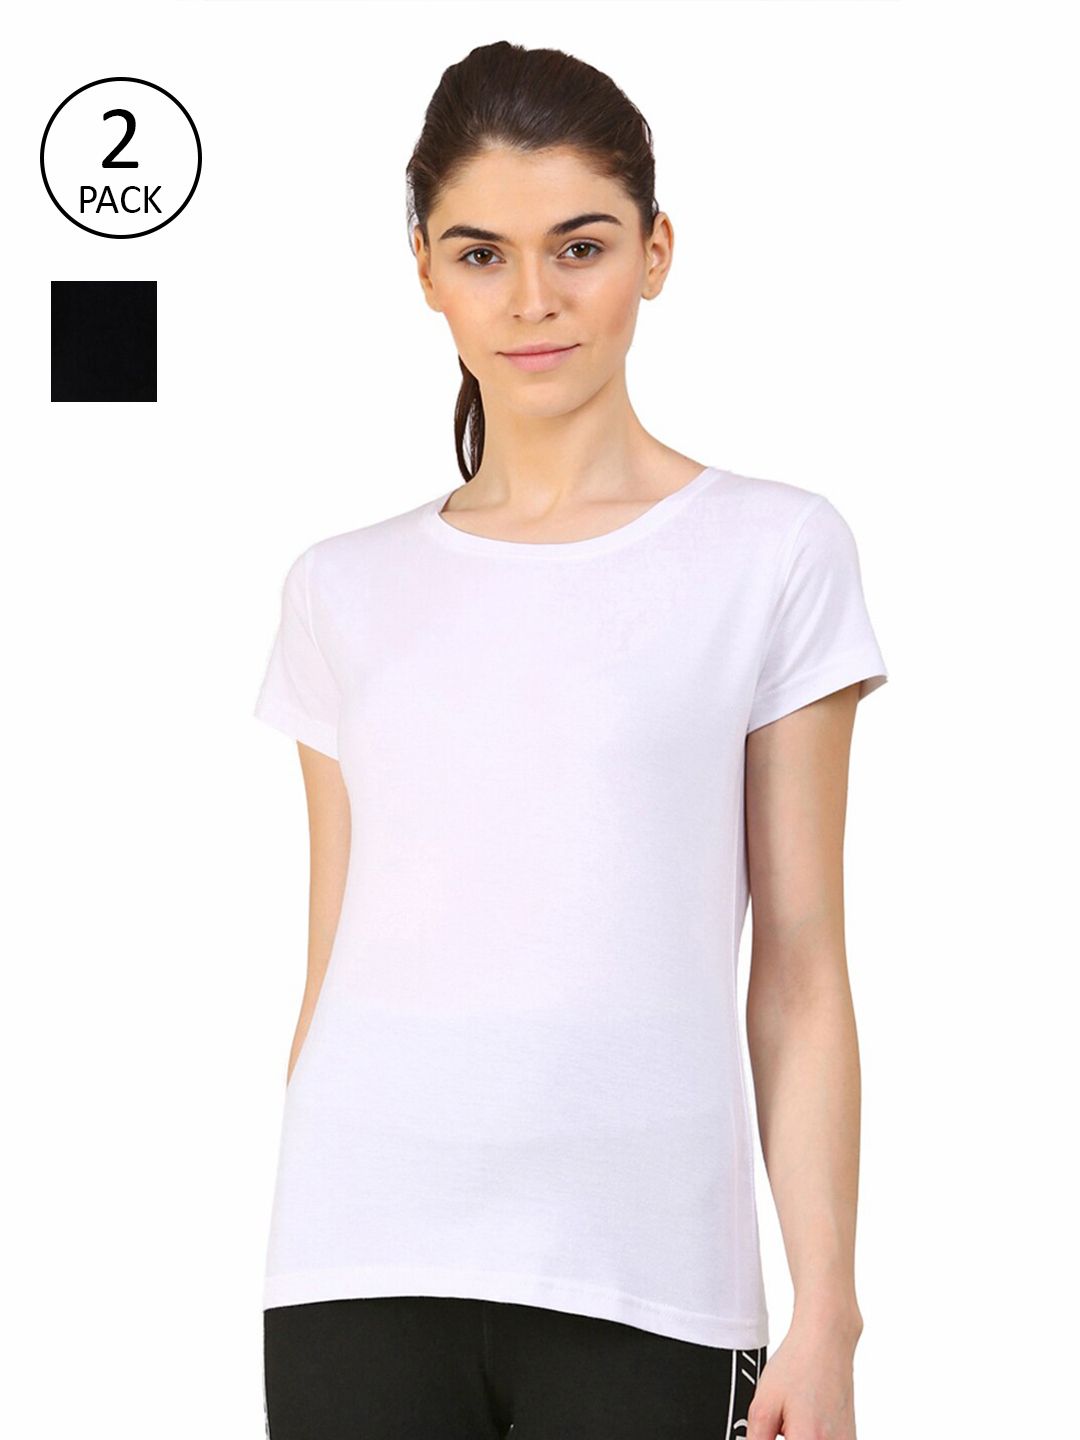 appulse Women White & Black Pack Of 2 Slim Fit Running Cotton T-shirt Price in India